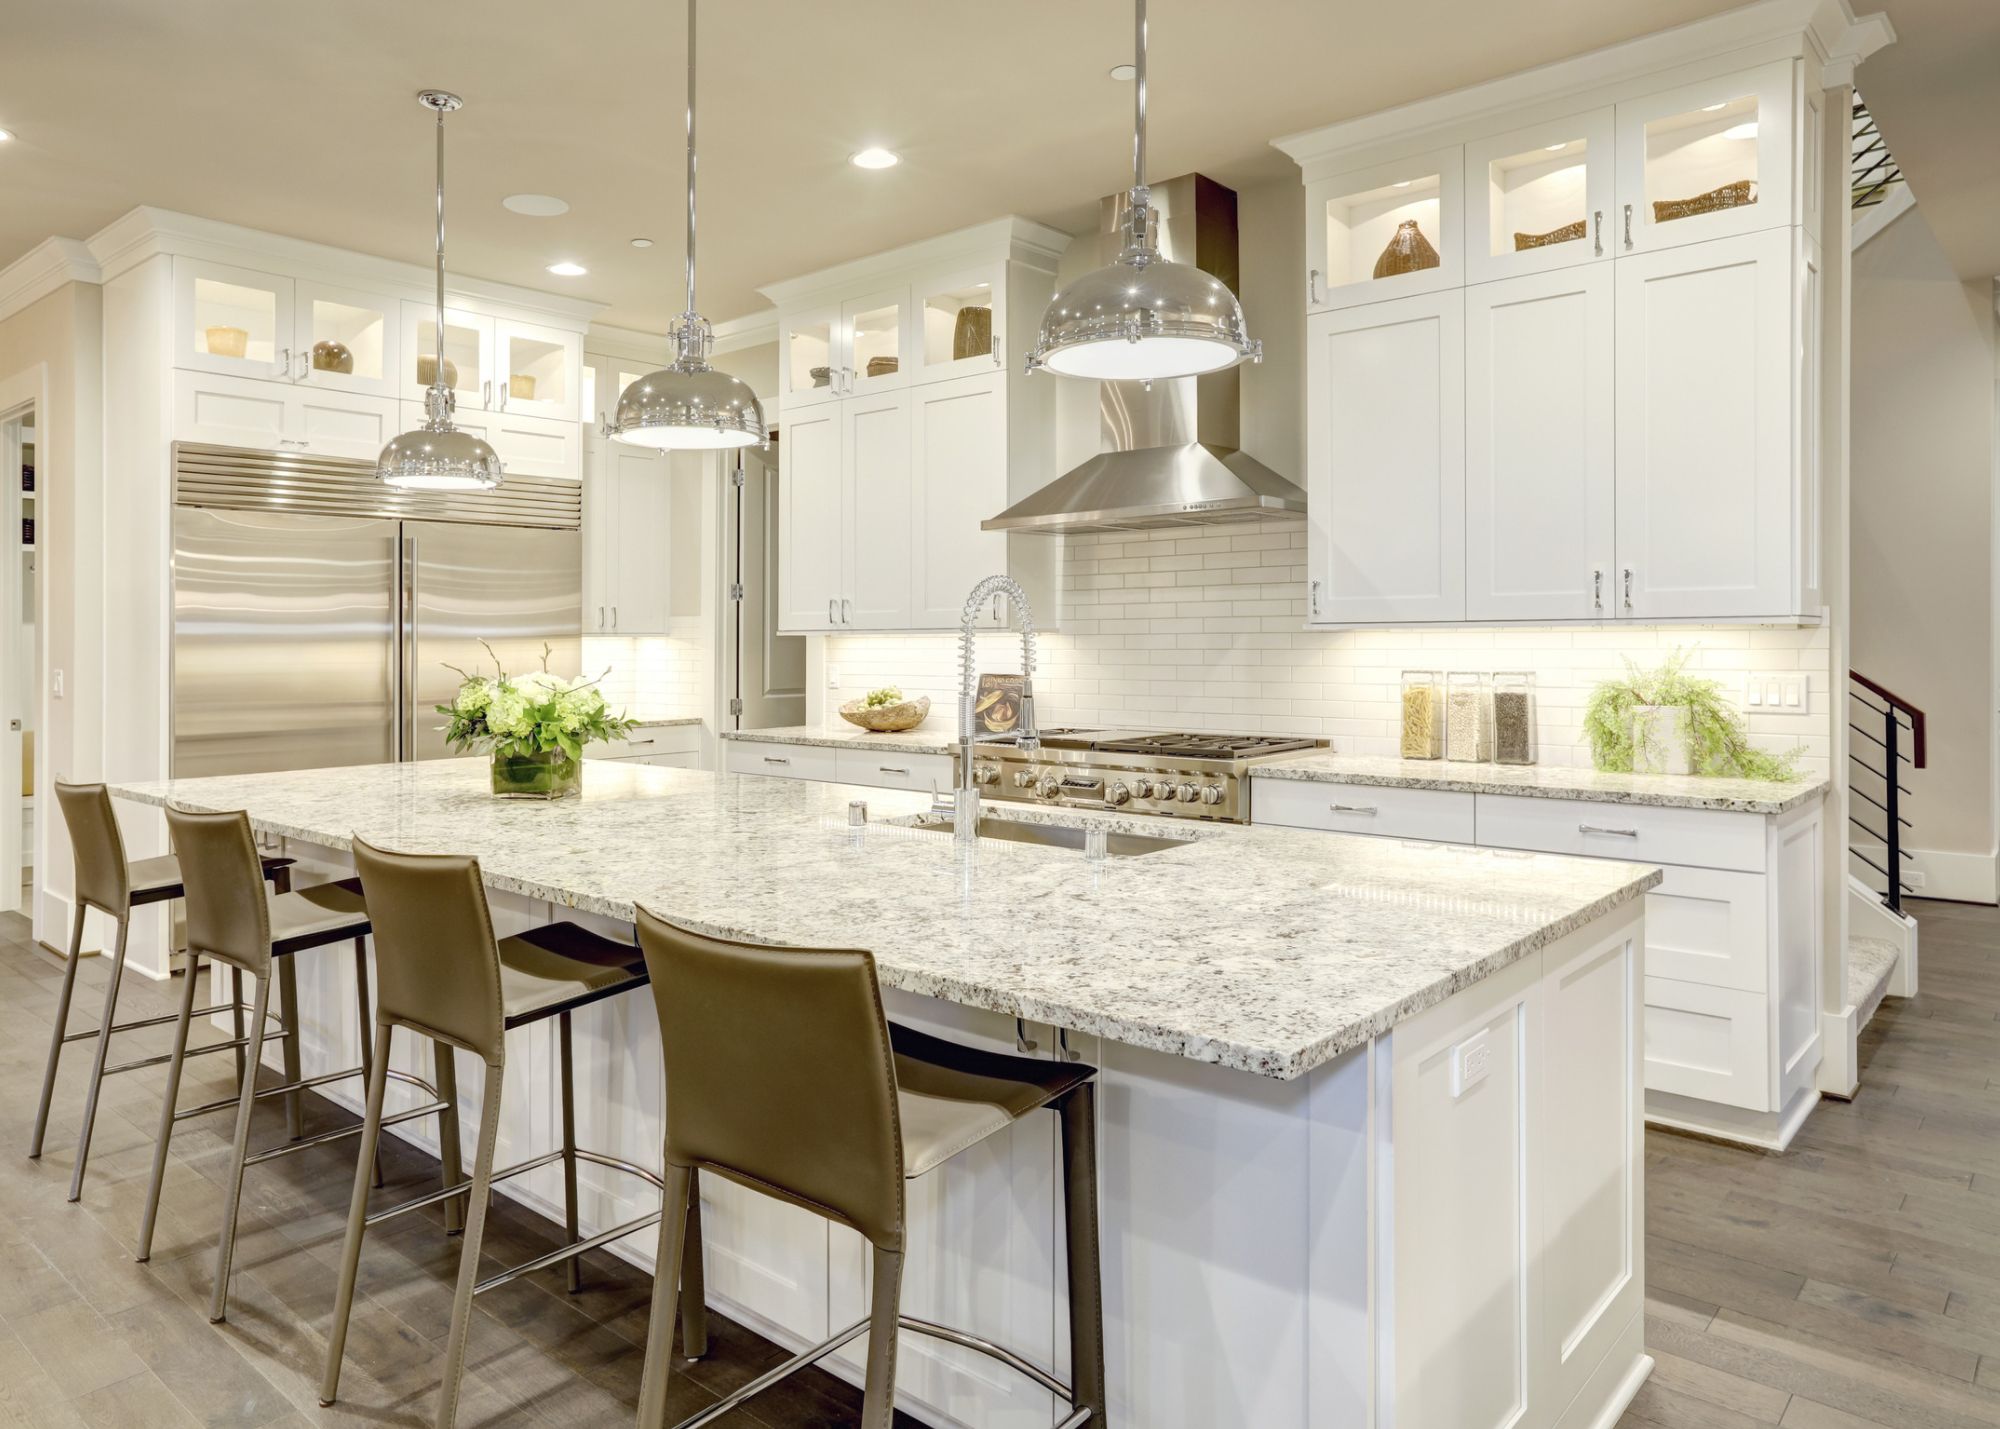 Farmwell Kitchen Remodeling Solutions